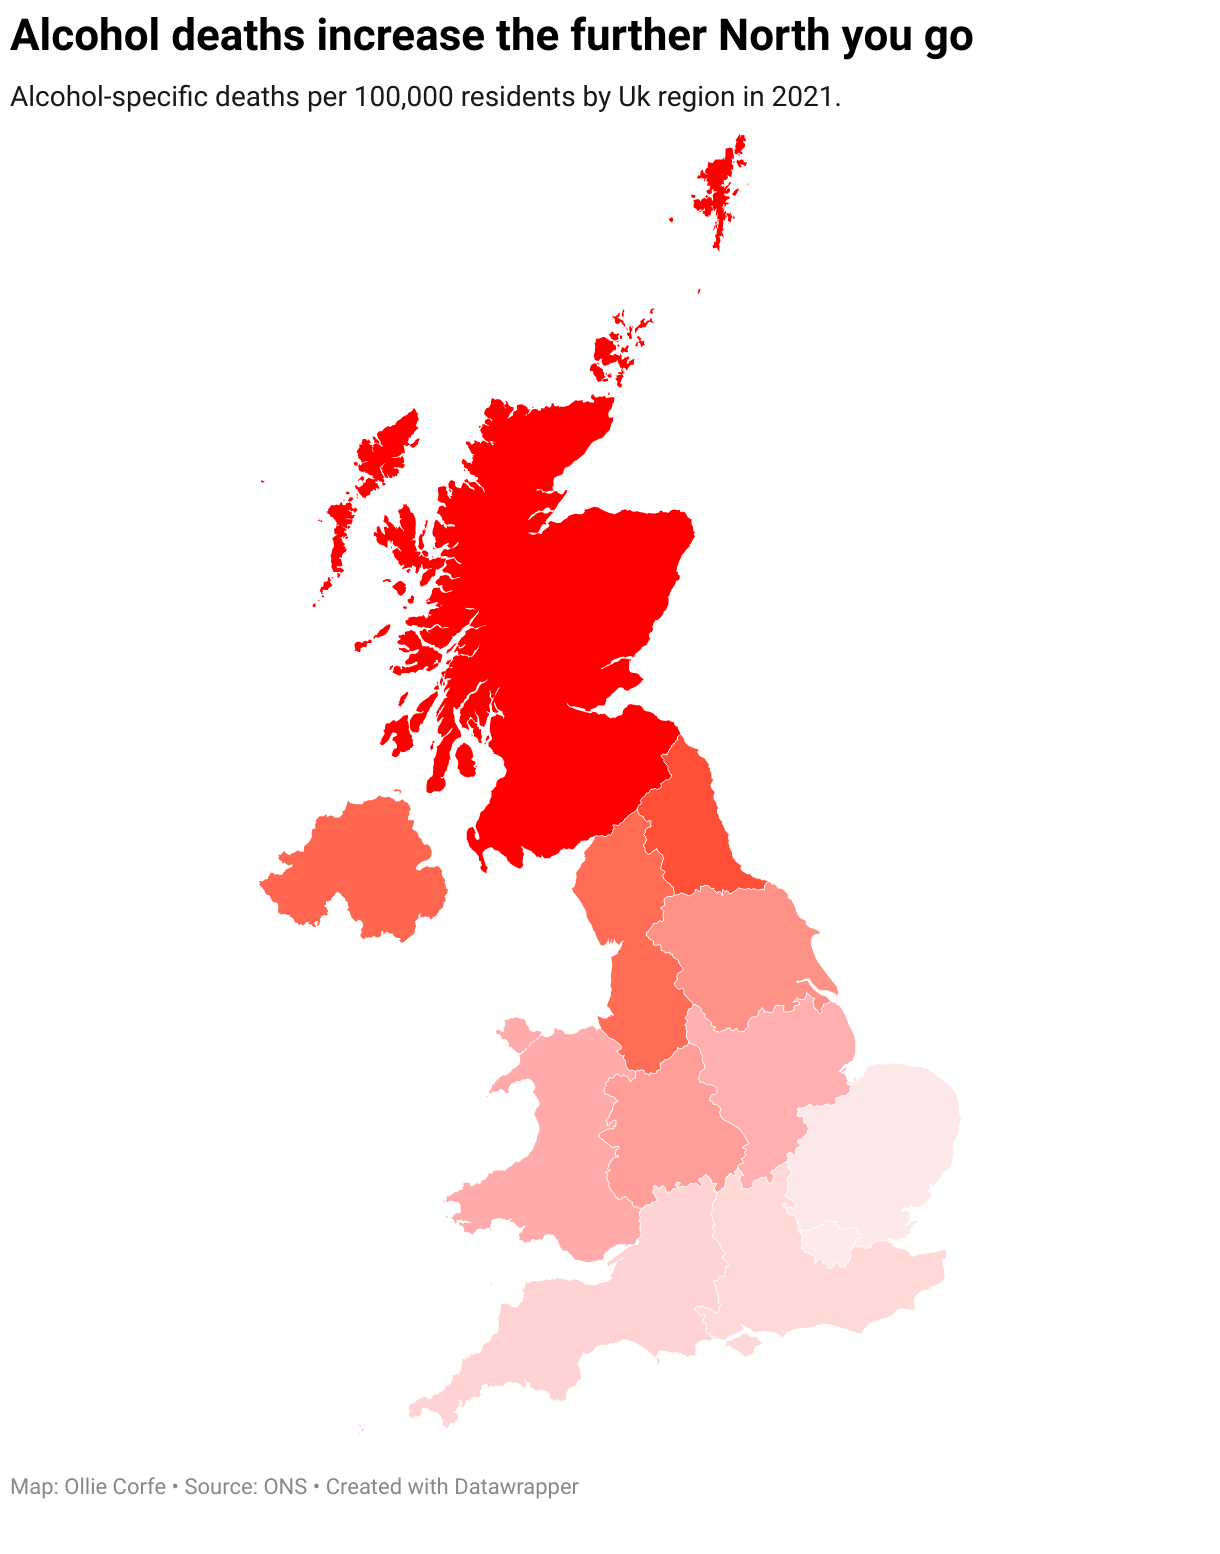 Map of UK alcohol death rates.